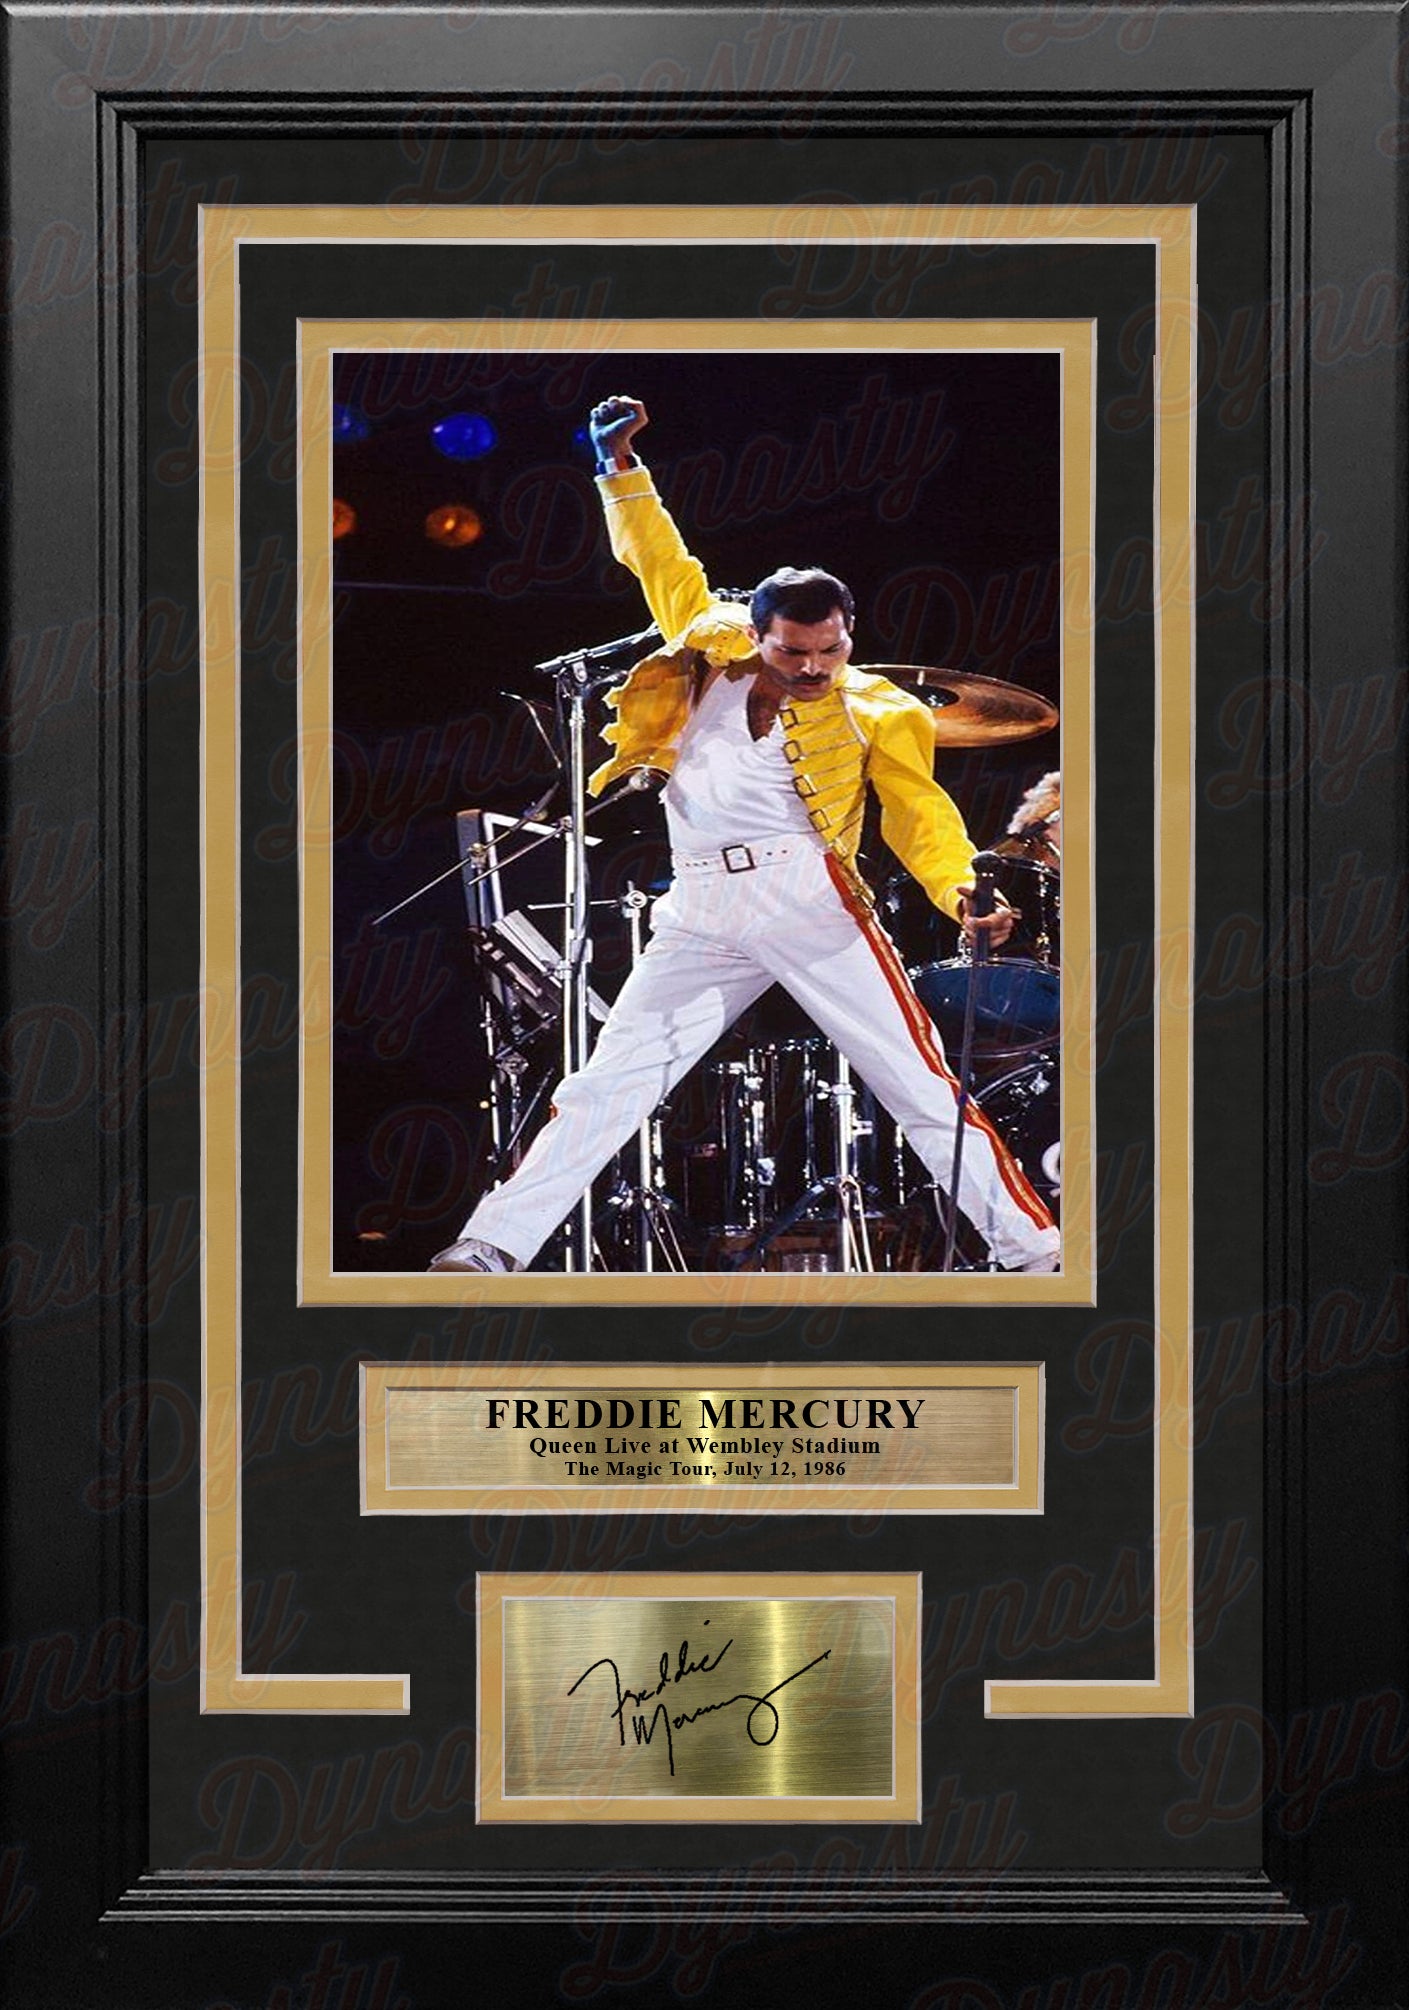 Freddie Mercury Queen at Wembley Stadium 8" x 10" Framed Photo with Engraved Autograph - Dynasty Sports & Framing 